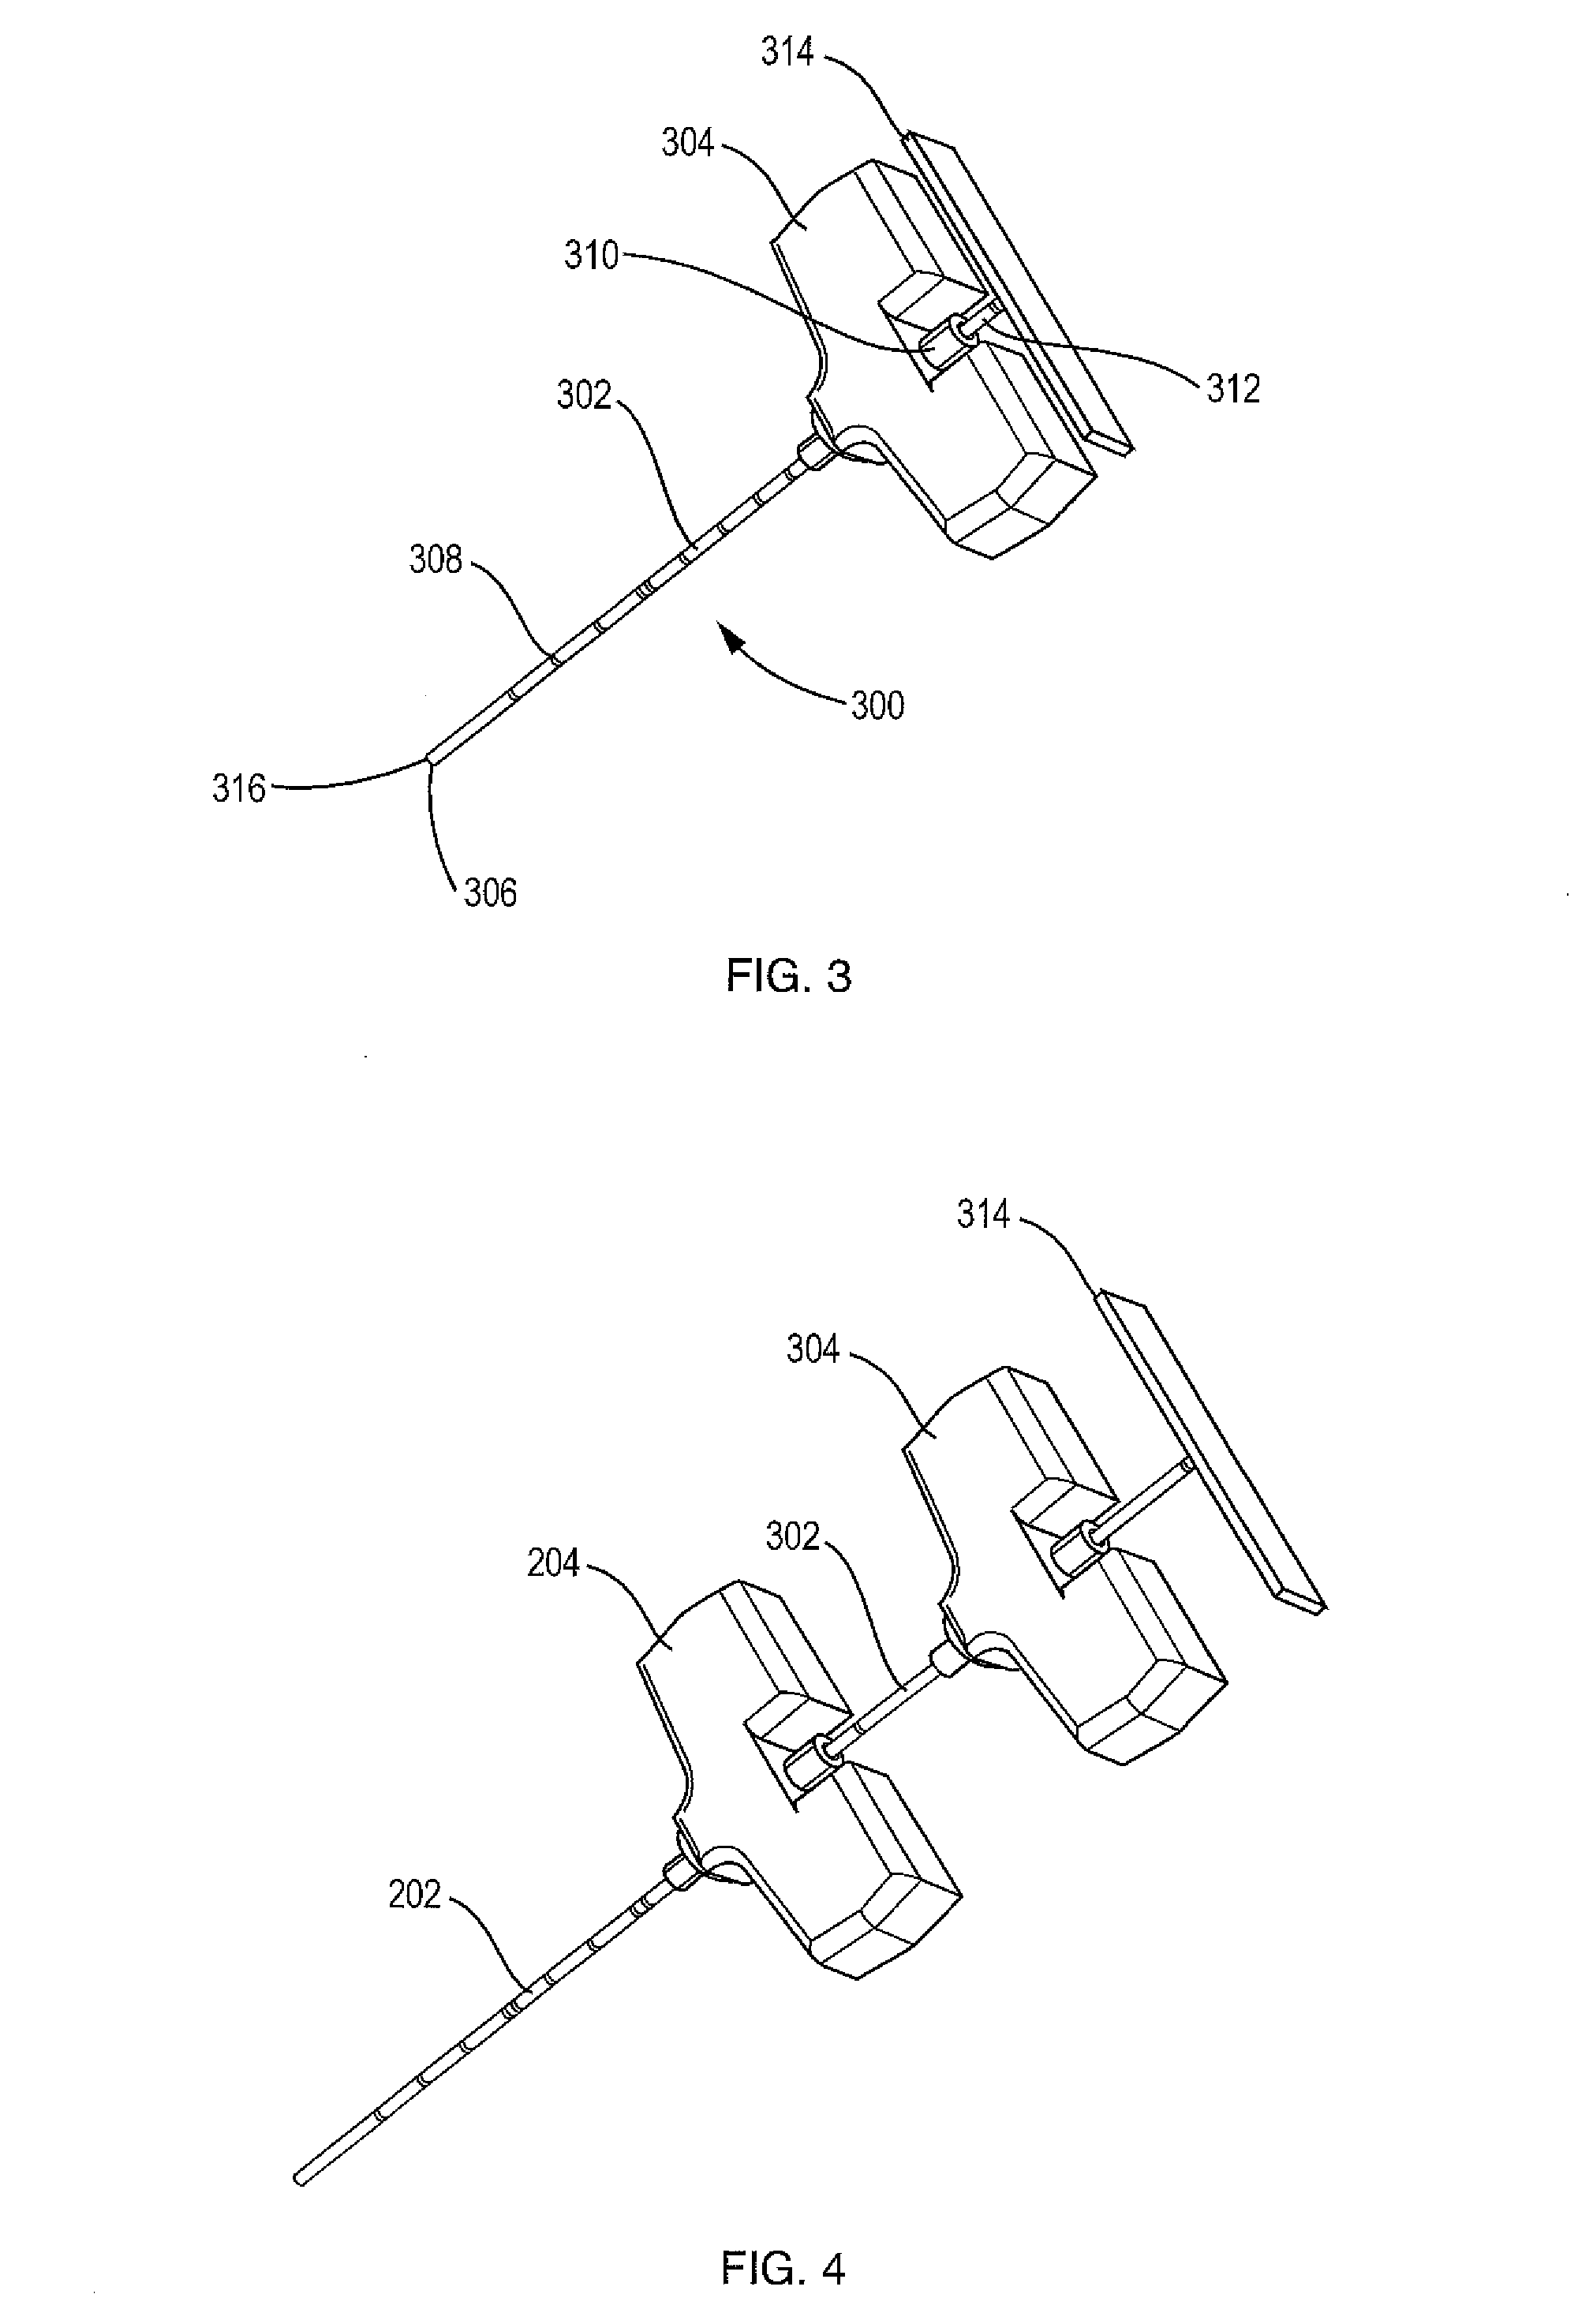 Apparatus And Methods For Aspirating And Separating Components Of Different Densities From A Physiological Fluid Containing Cells